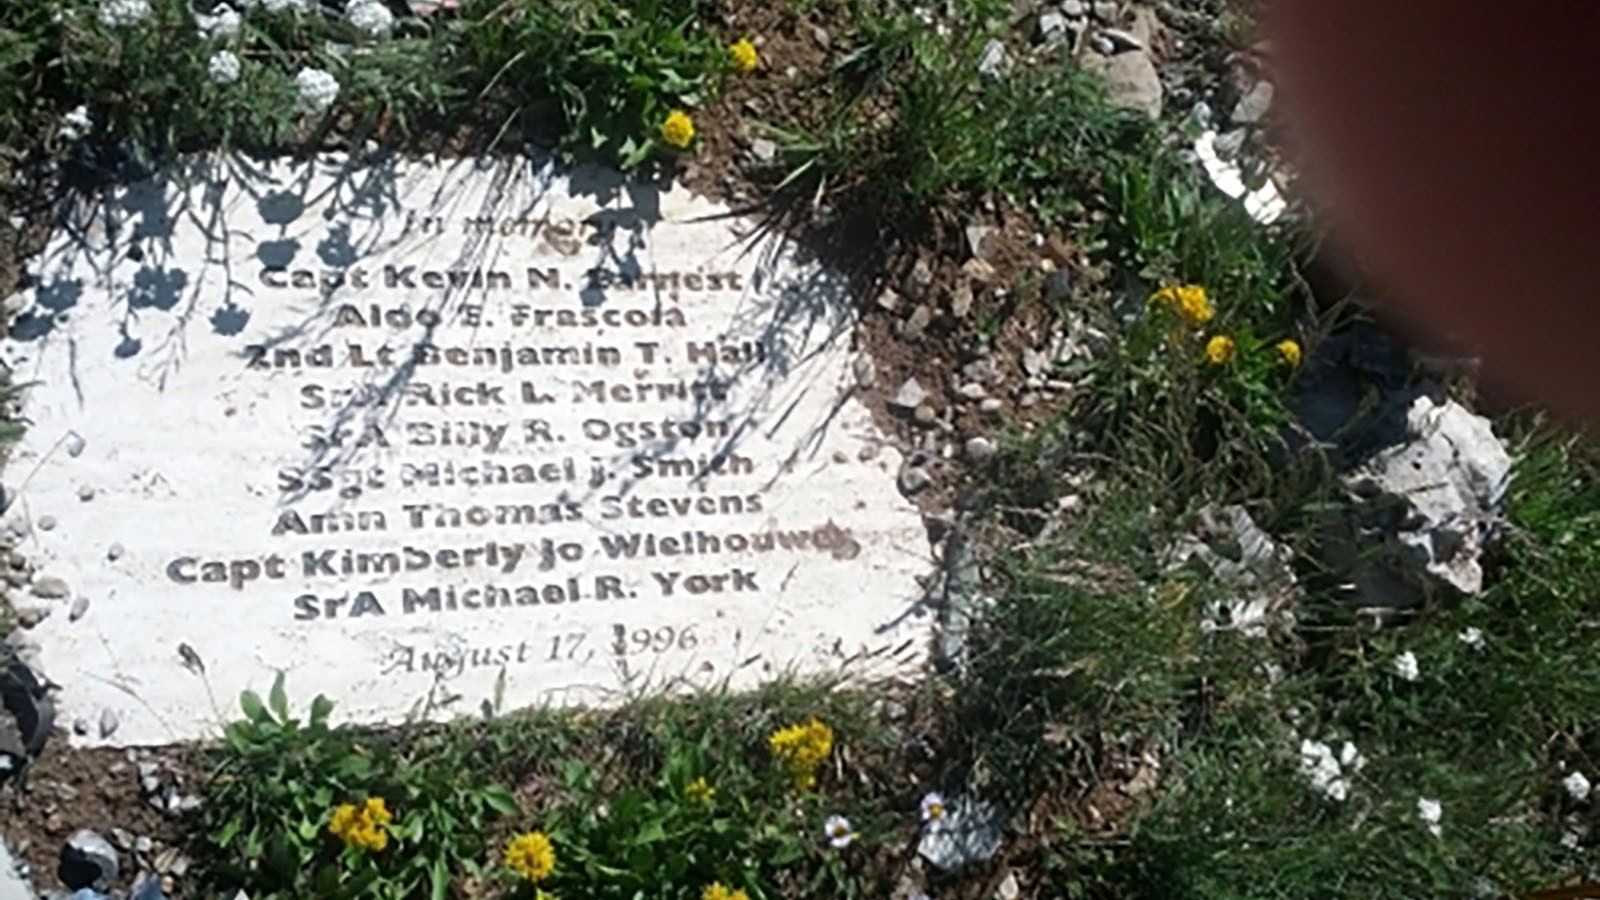 The names of those lost are on this stone at the crash site.